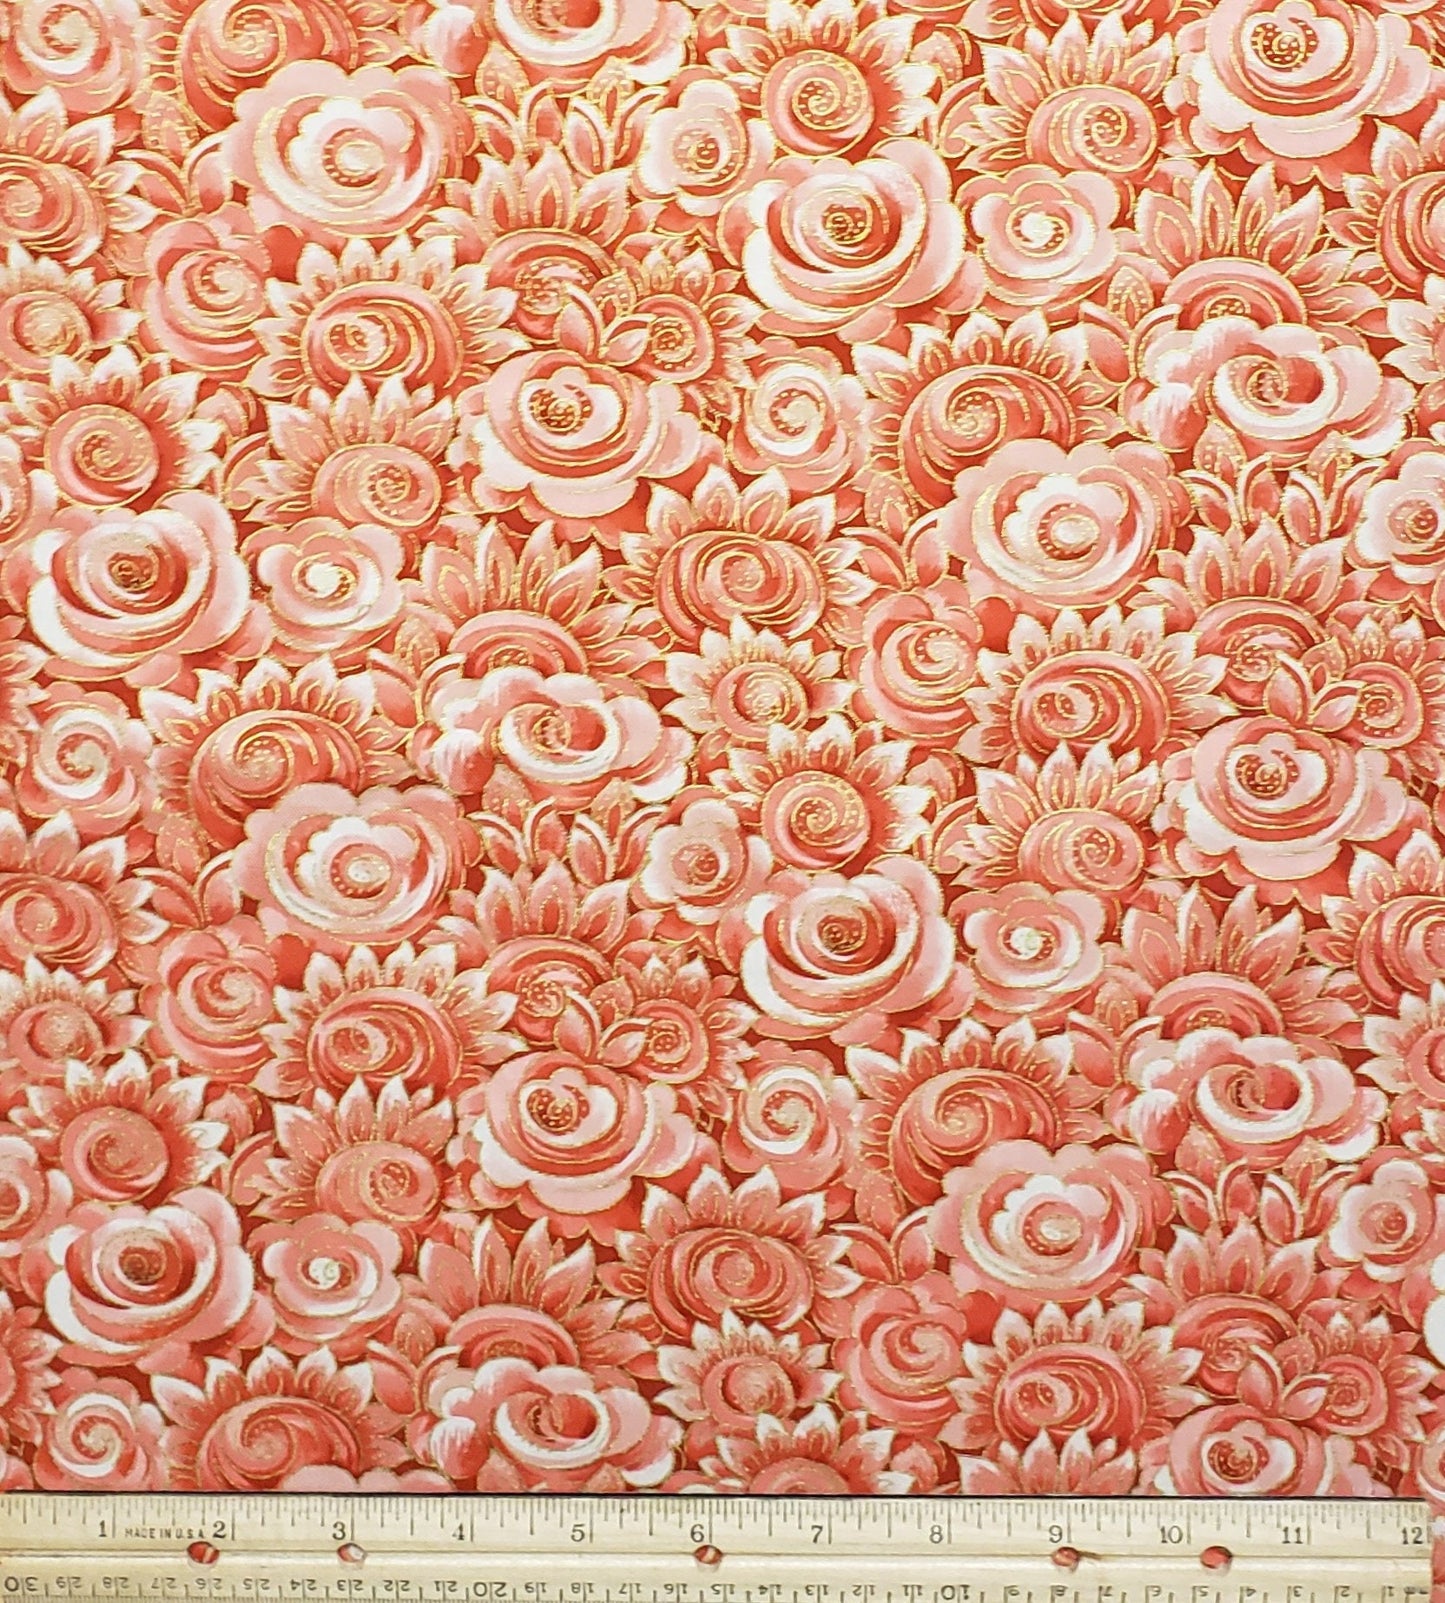 F772 Camden Café Designed by Fabric Freedom in London England - Coral Tonal Flower Print / Gold Metallic Accent